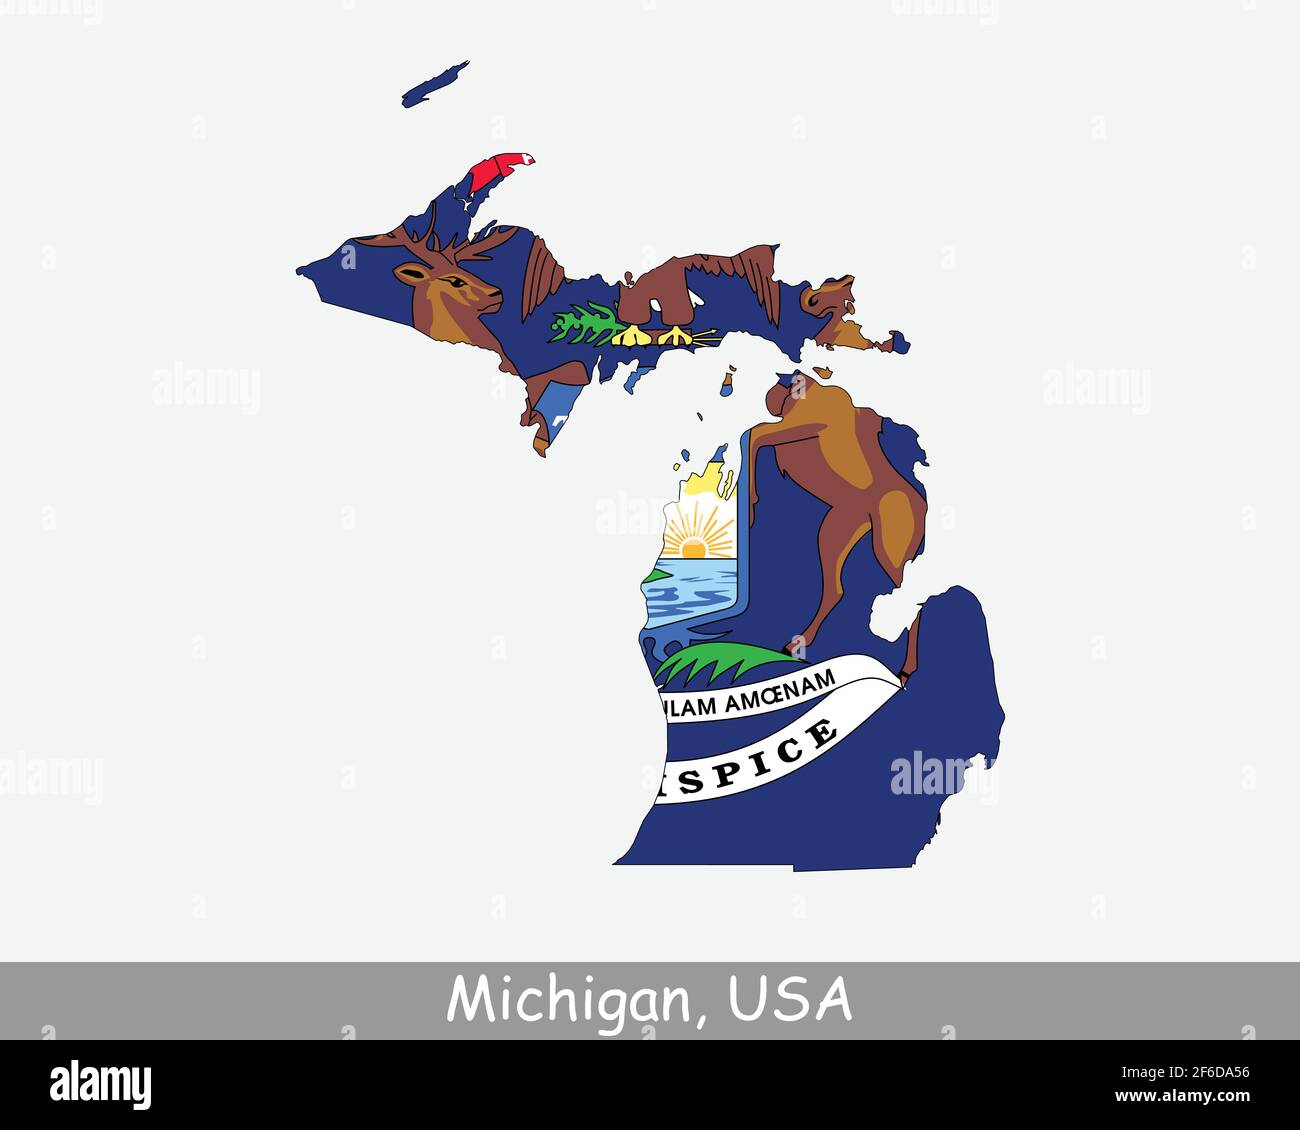 Michigan Map Flag. Map of MI, USA with the state flag isolated on white background. United States, America, American, United States of America, US Sta Stock Vector